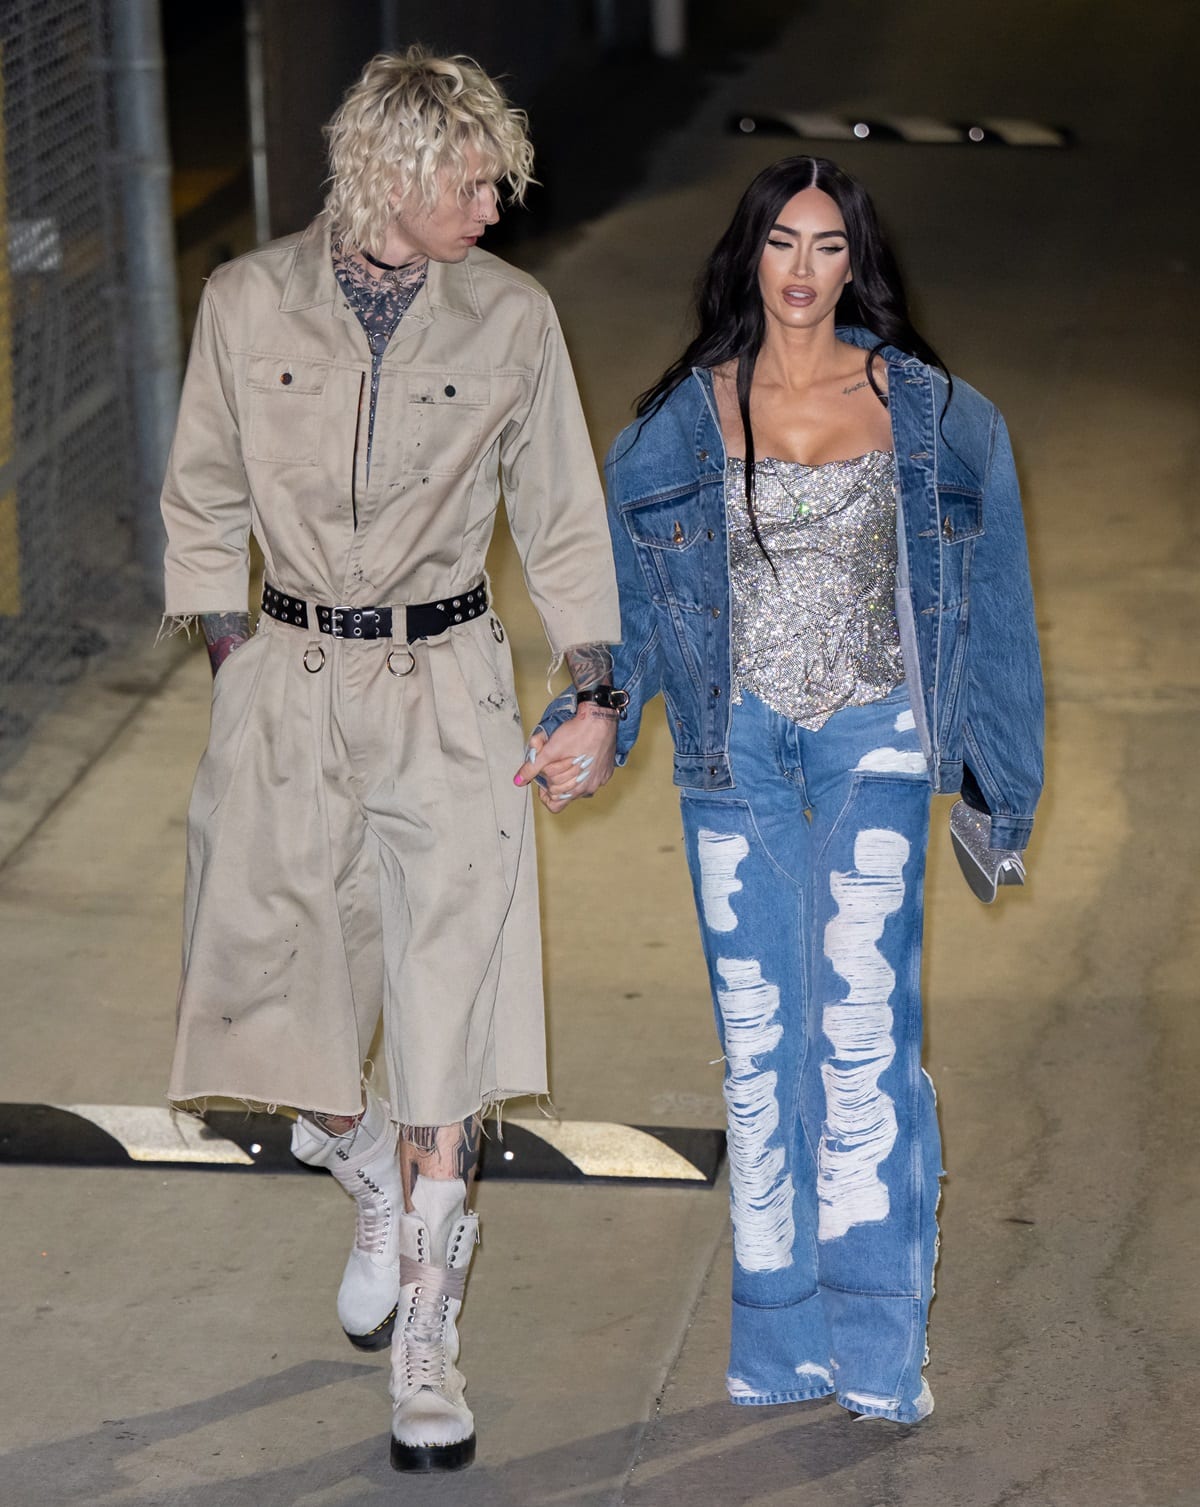 Megan Fox showed her support for Machine Gun Kelly holding hands as they arrived at the studio for the taping of Jimmy Kimmel Live!